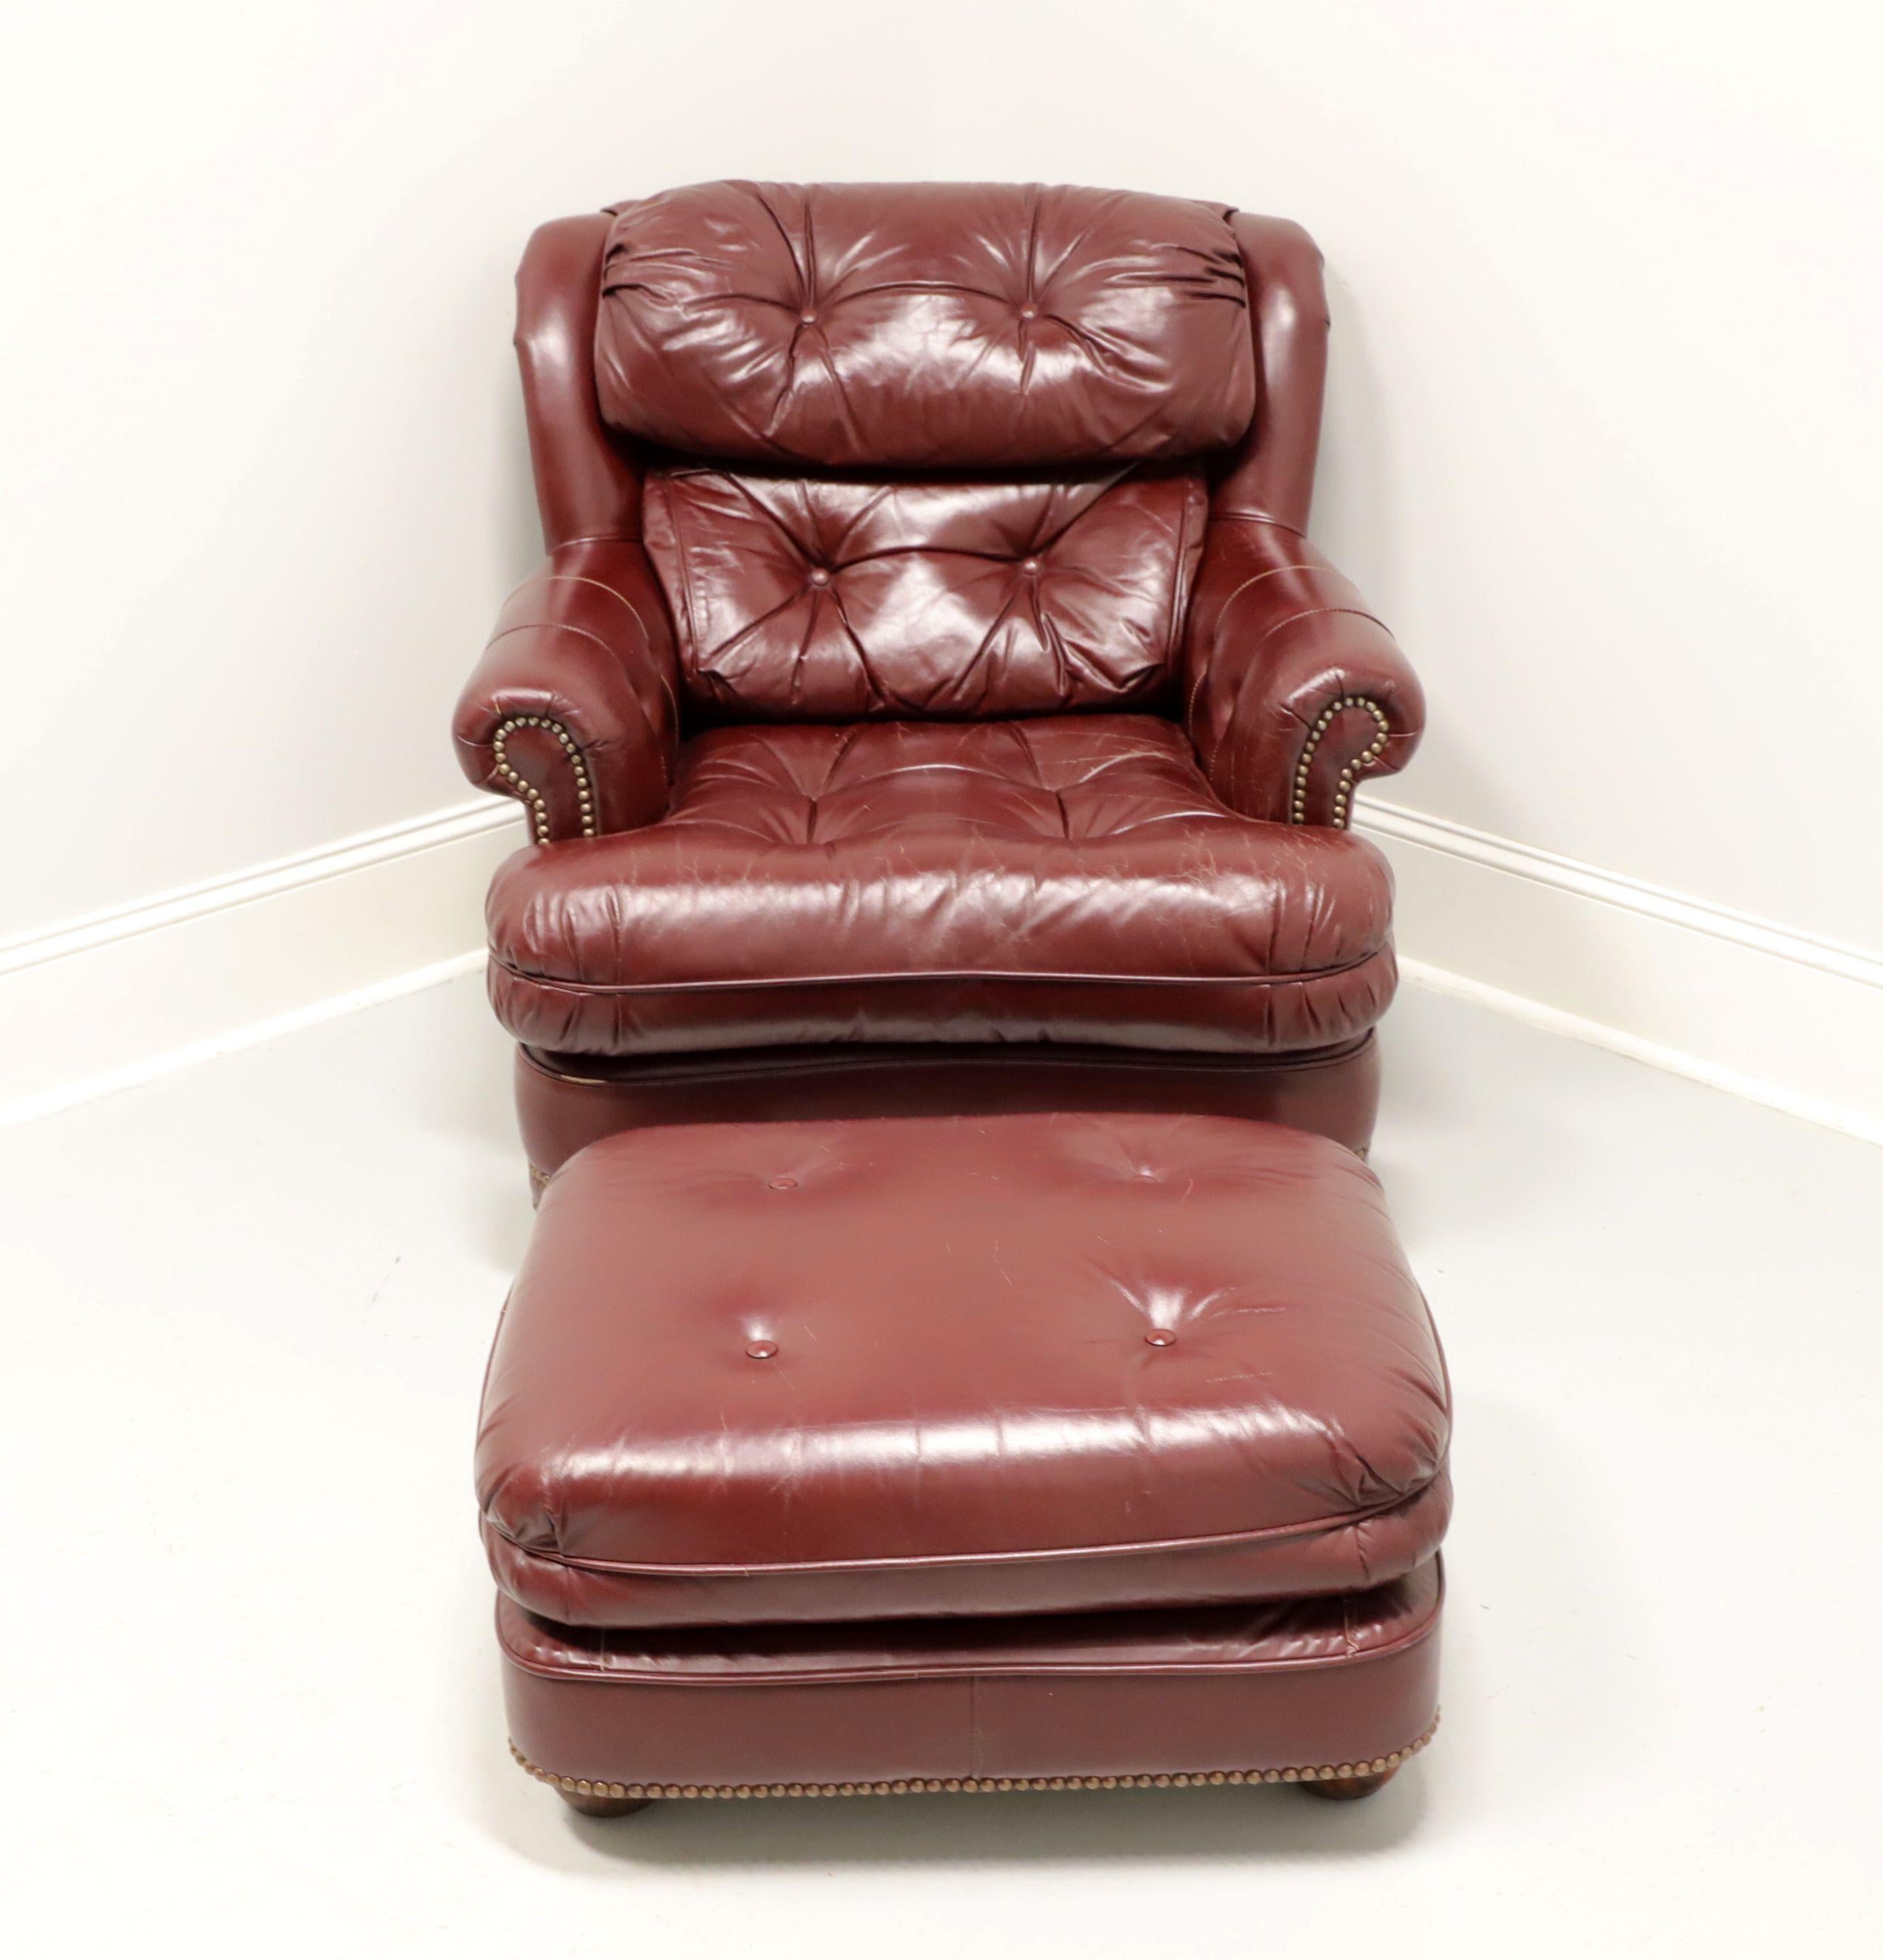 A Traditional style lounge armchair and ottoman by Classic Leather. Burgundy color button tufted top grain genuine leather upholstery and brass nailhead trim. Hardwood frame, wood bun feet on ottoman and front feet of chair. Made in Conover, North